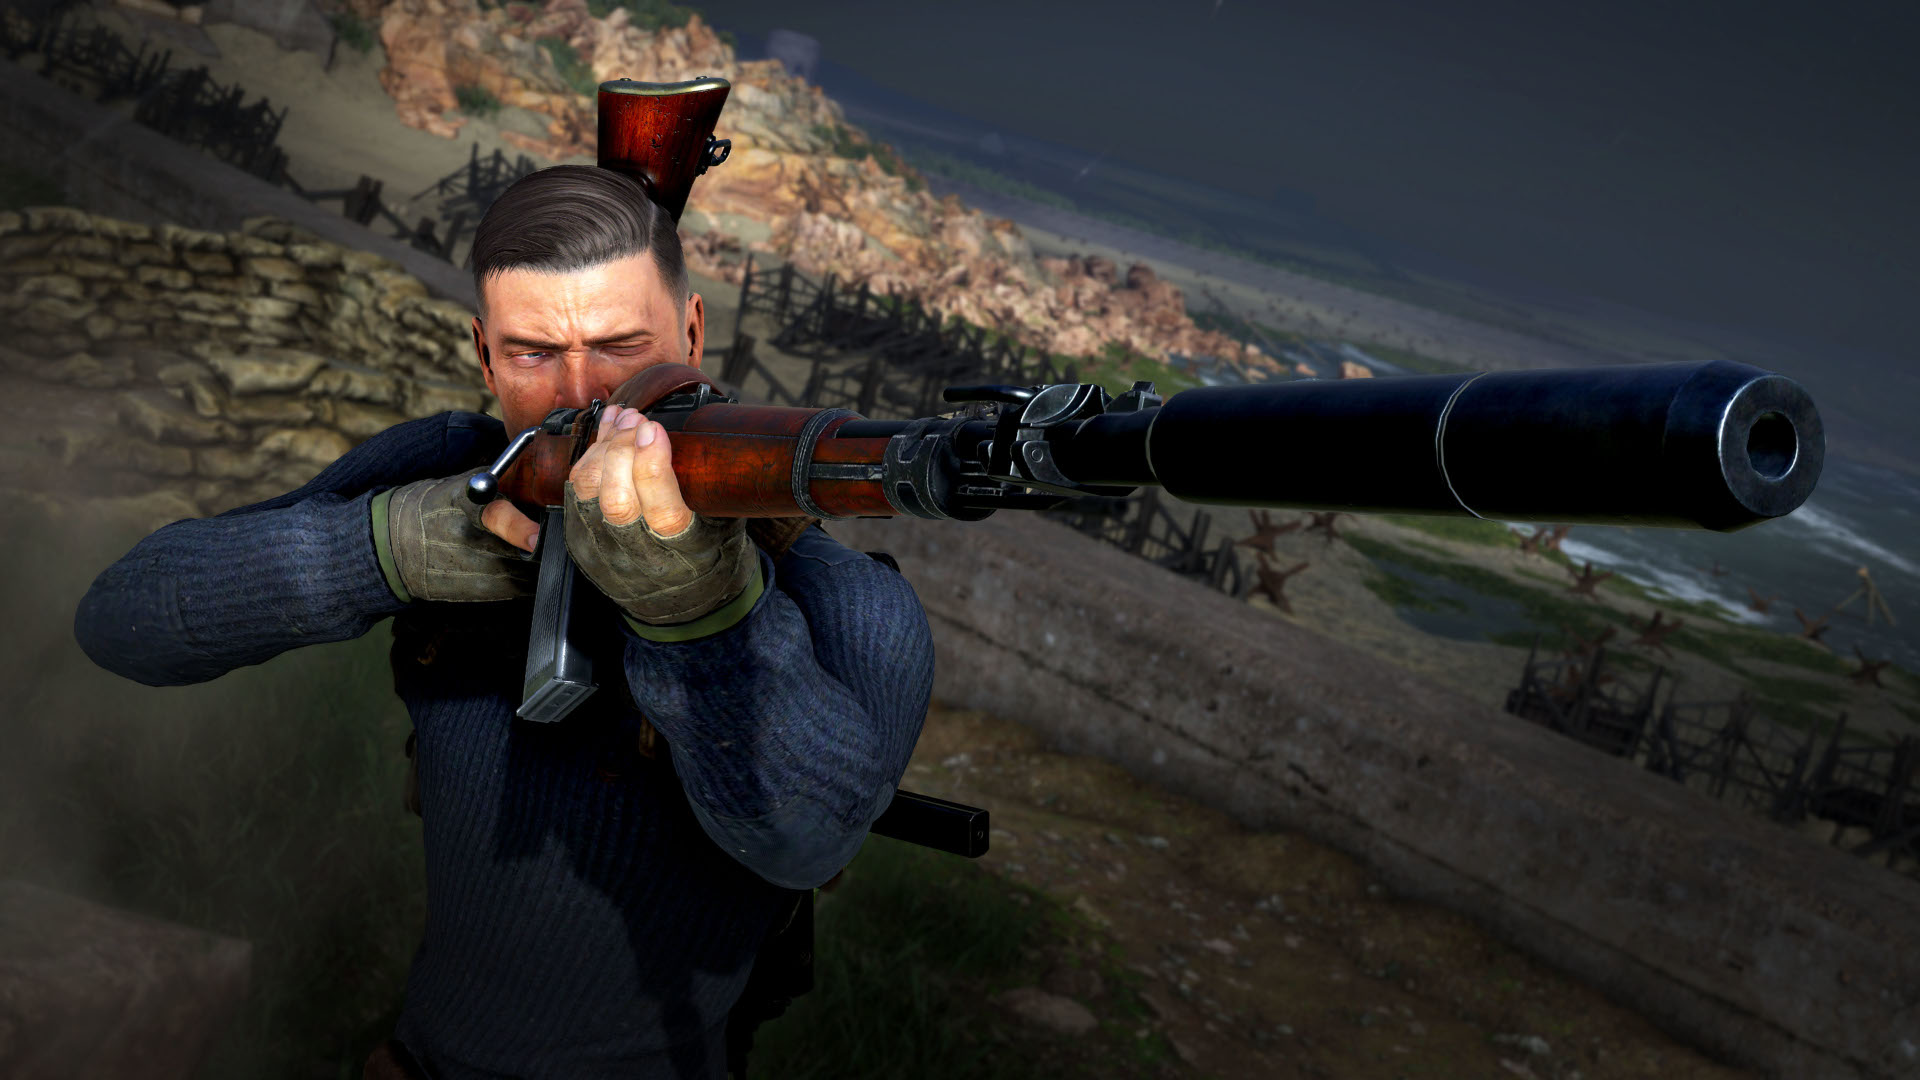 sniper-elite-5-s-most-exciting-feature-comes-from-dark-souls-techradar